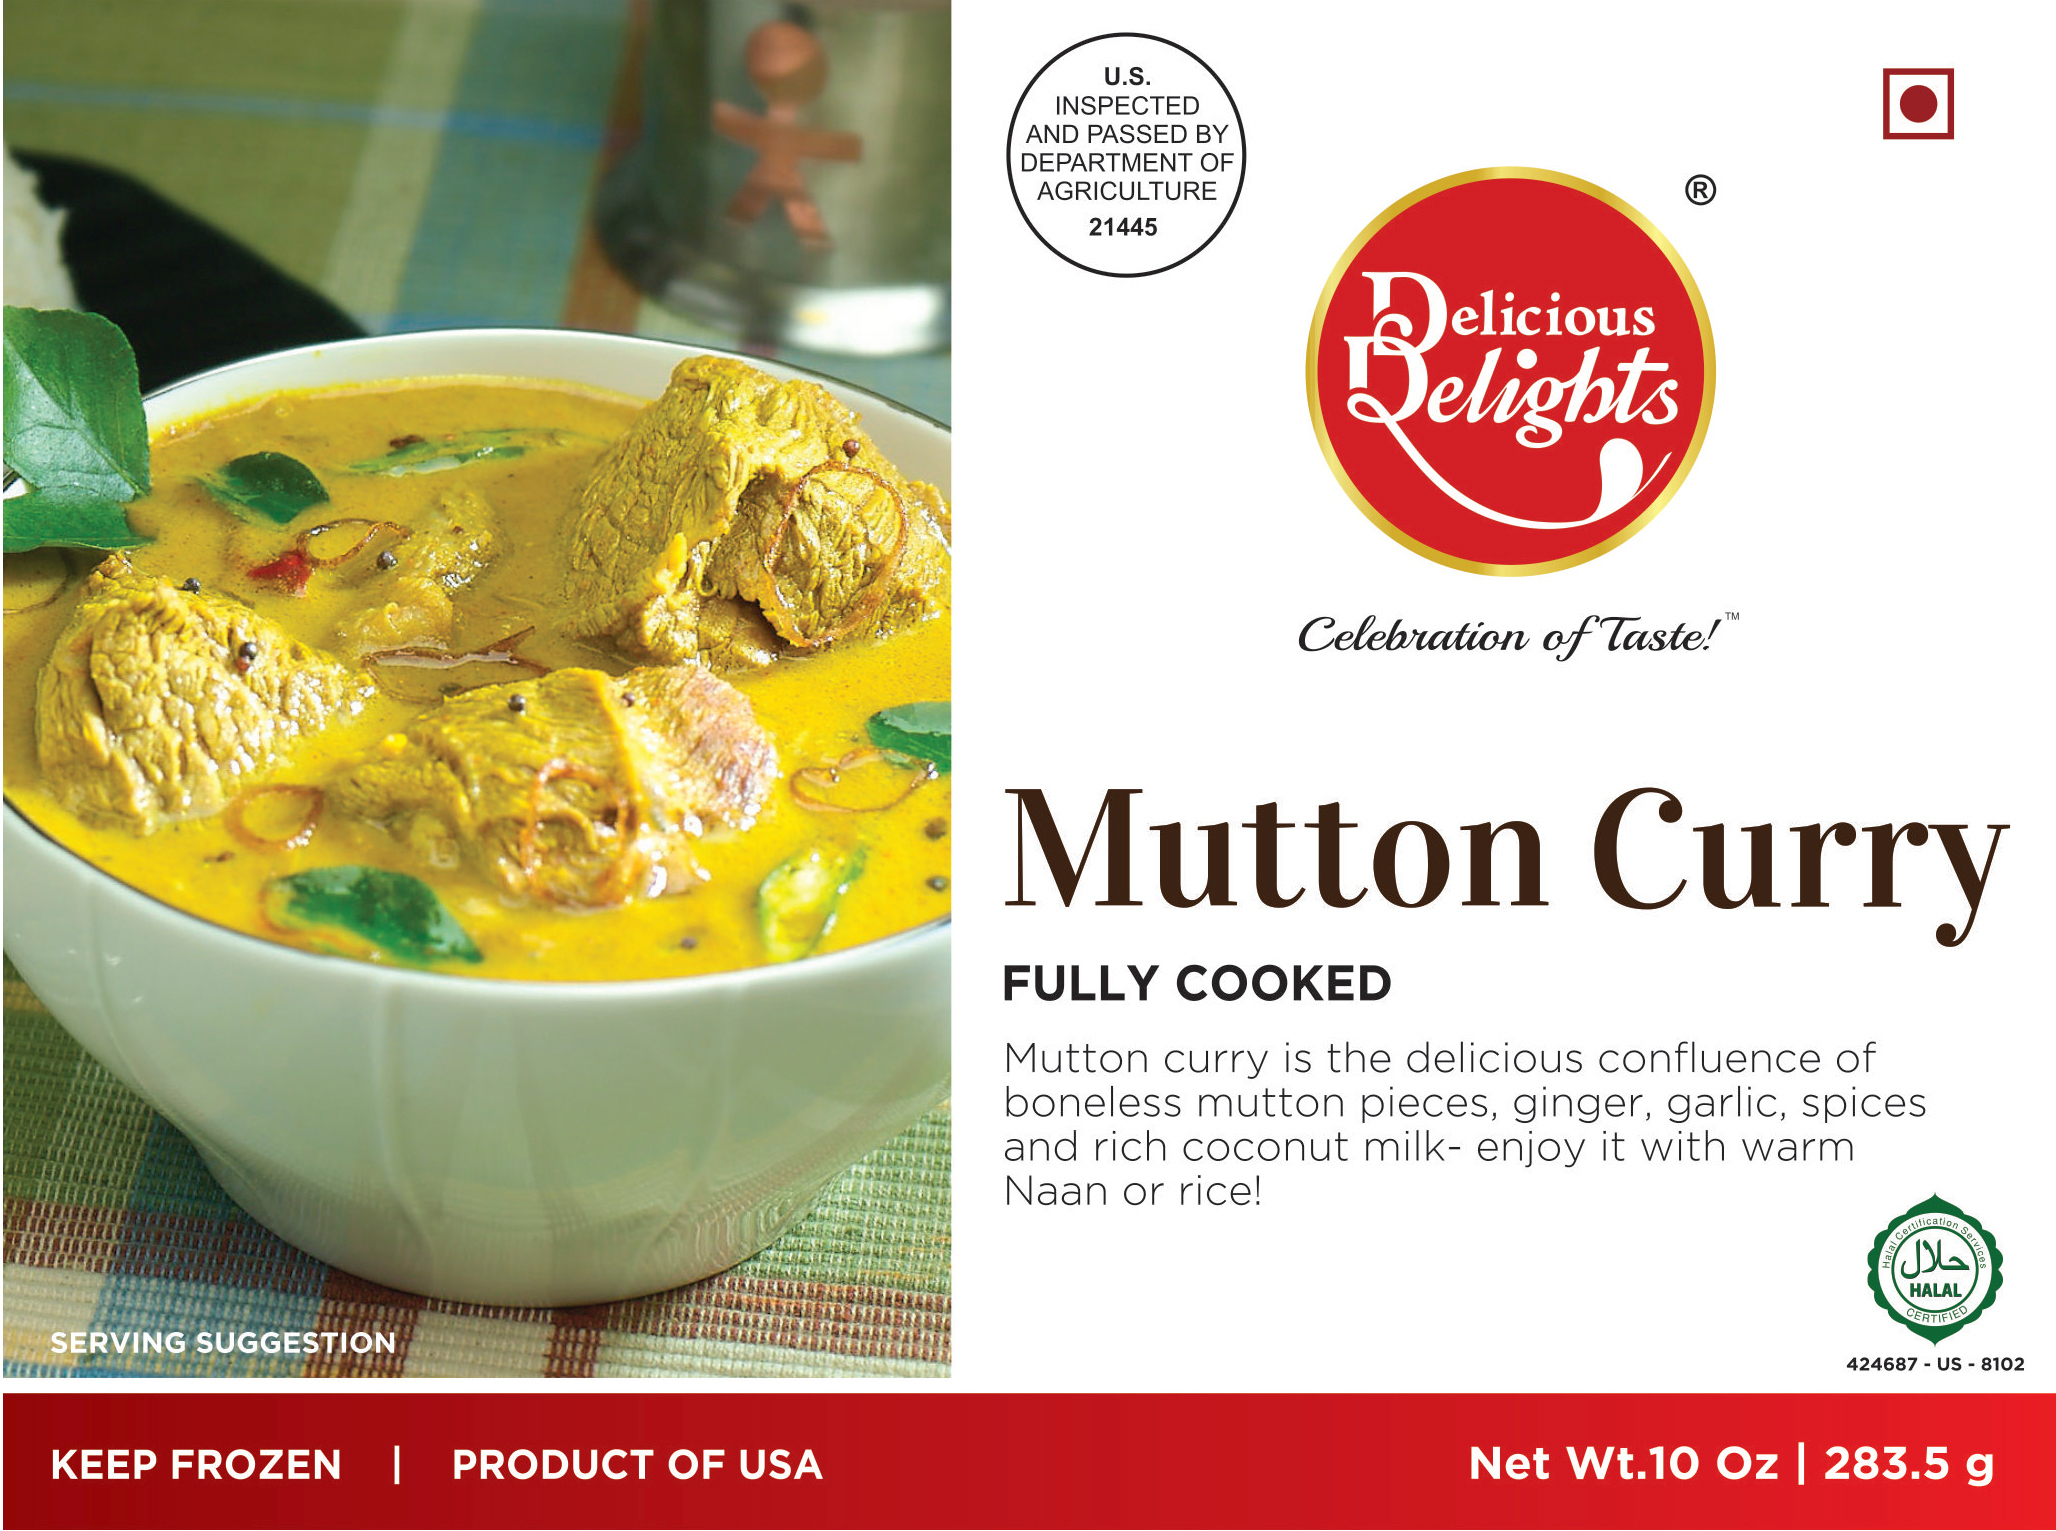 Delicious Delights Mutton Curry